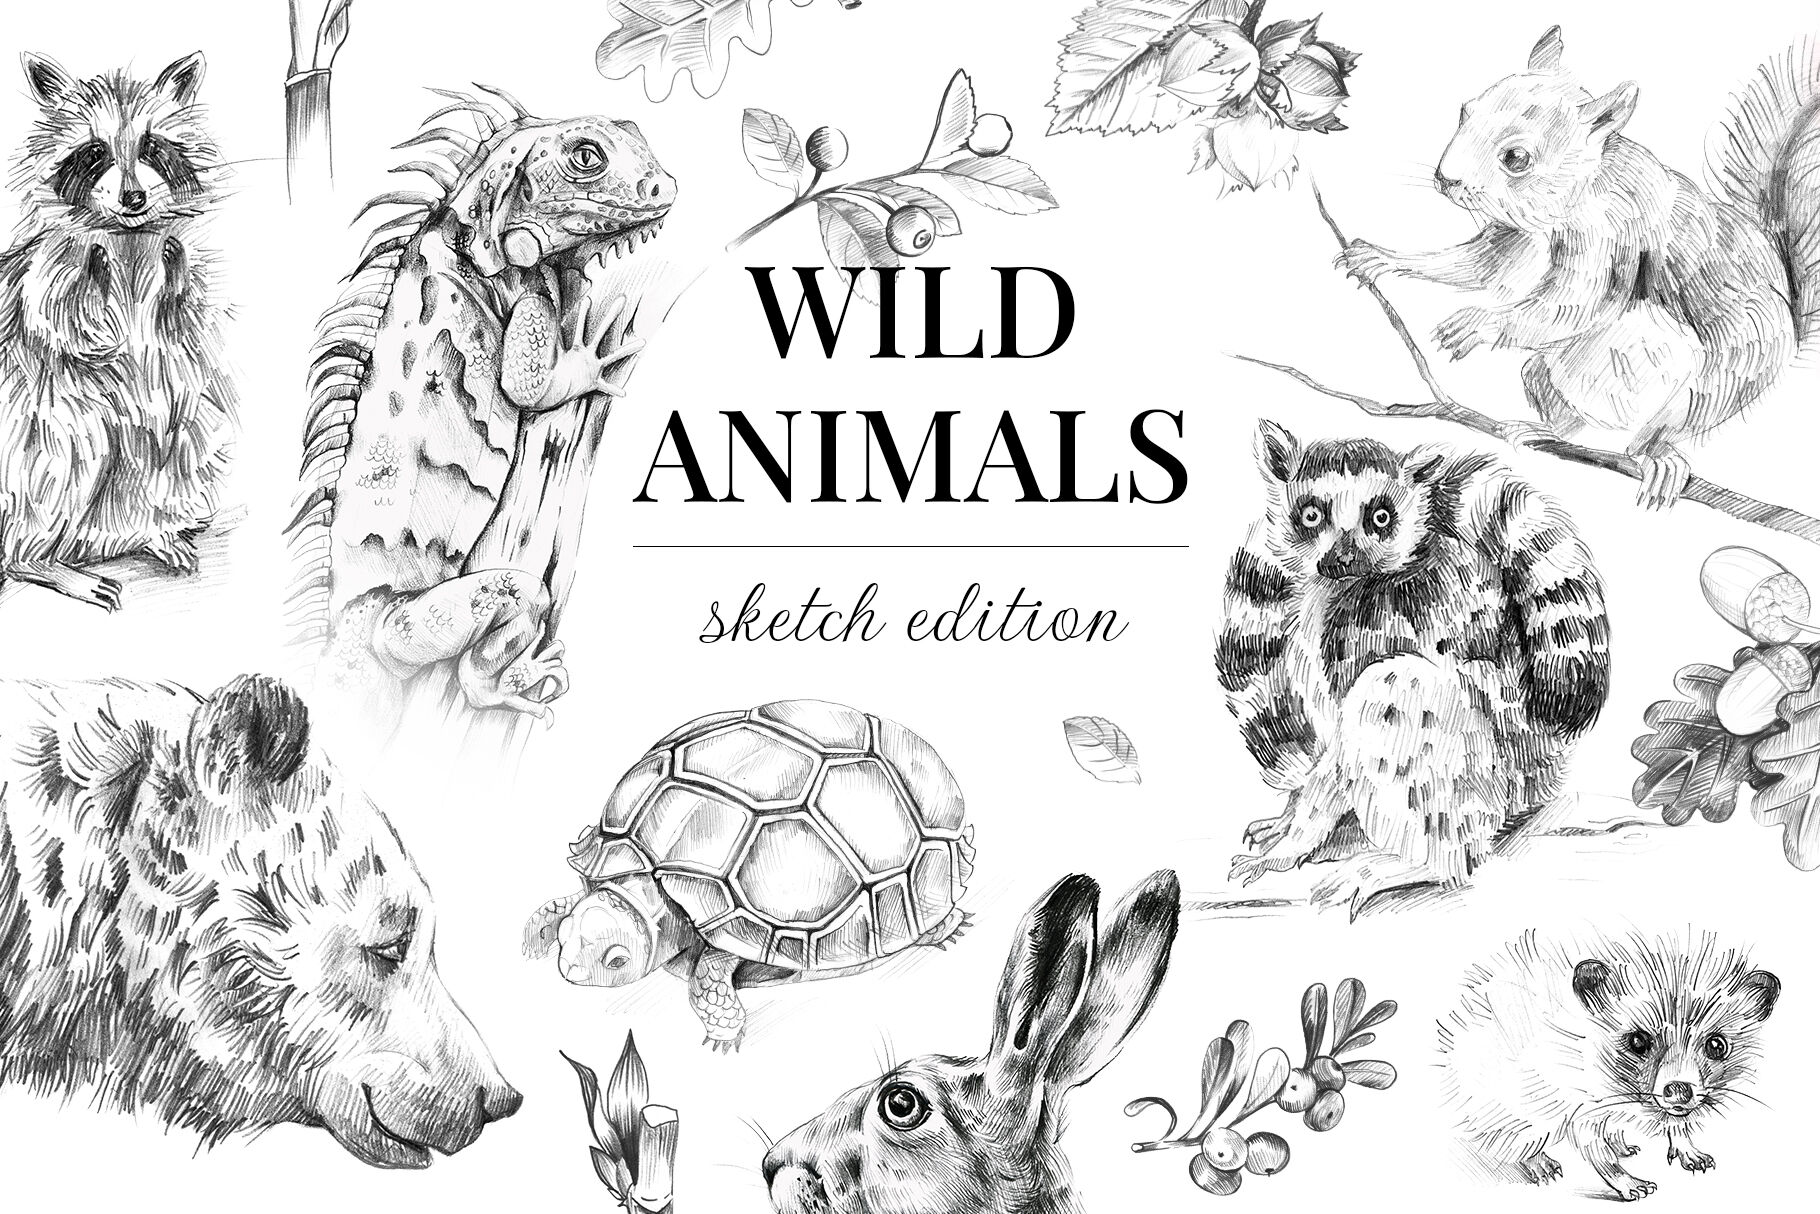 Drawing Realistic Wild Animals: Tips & Techniques-saigonsouth.com.vn